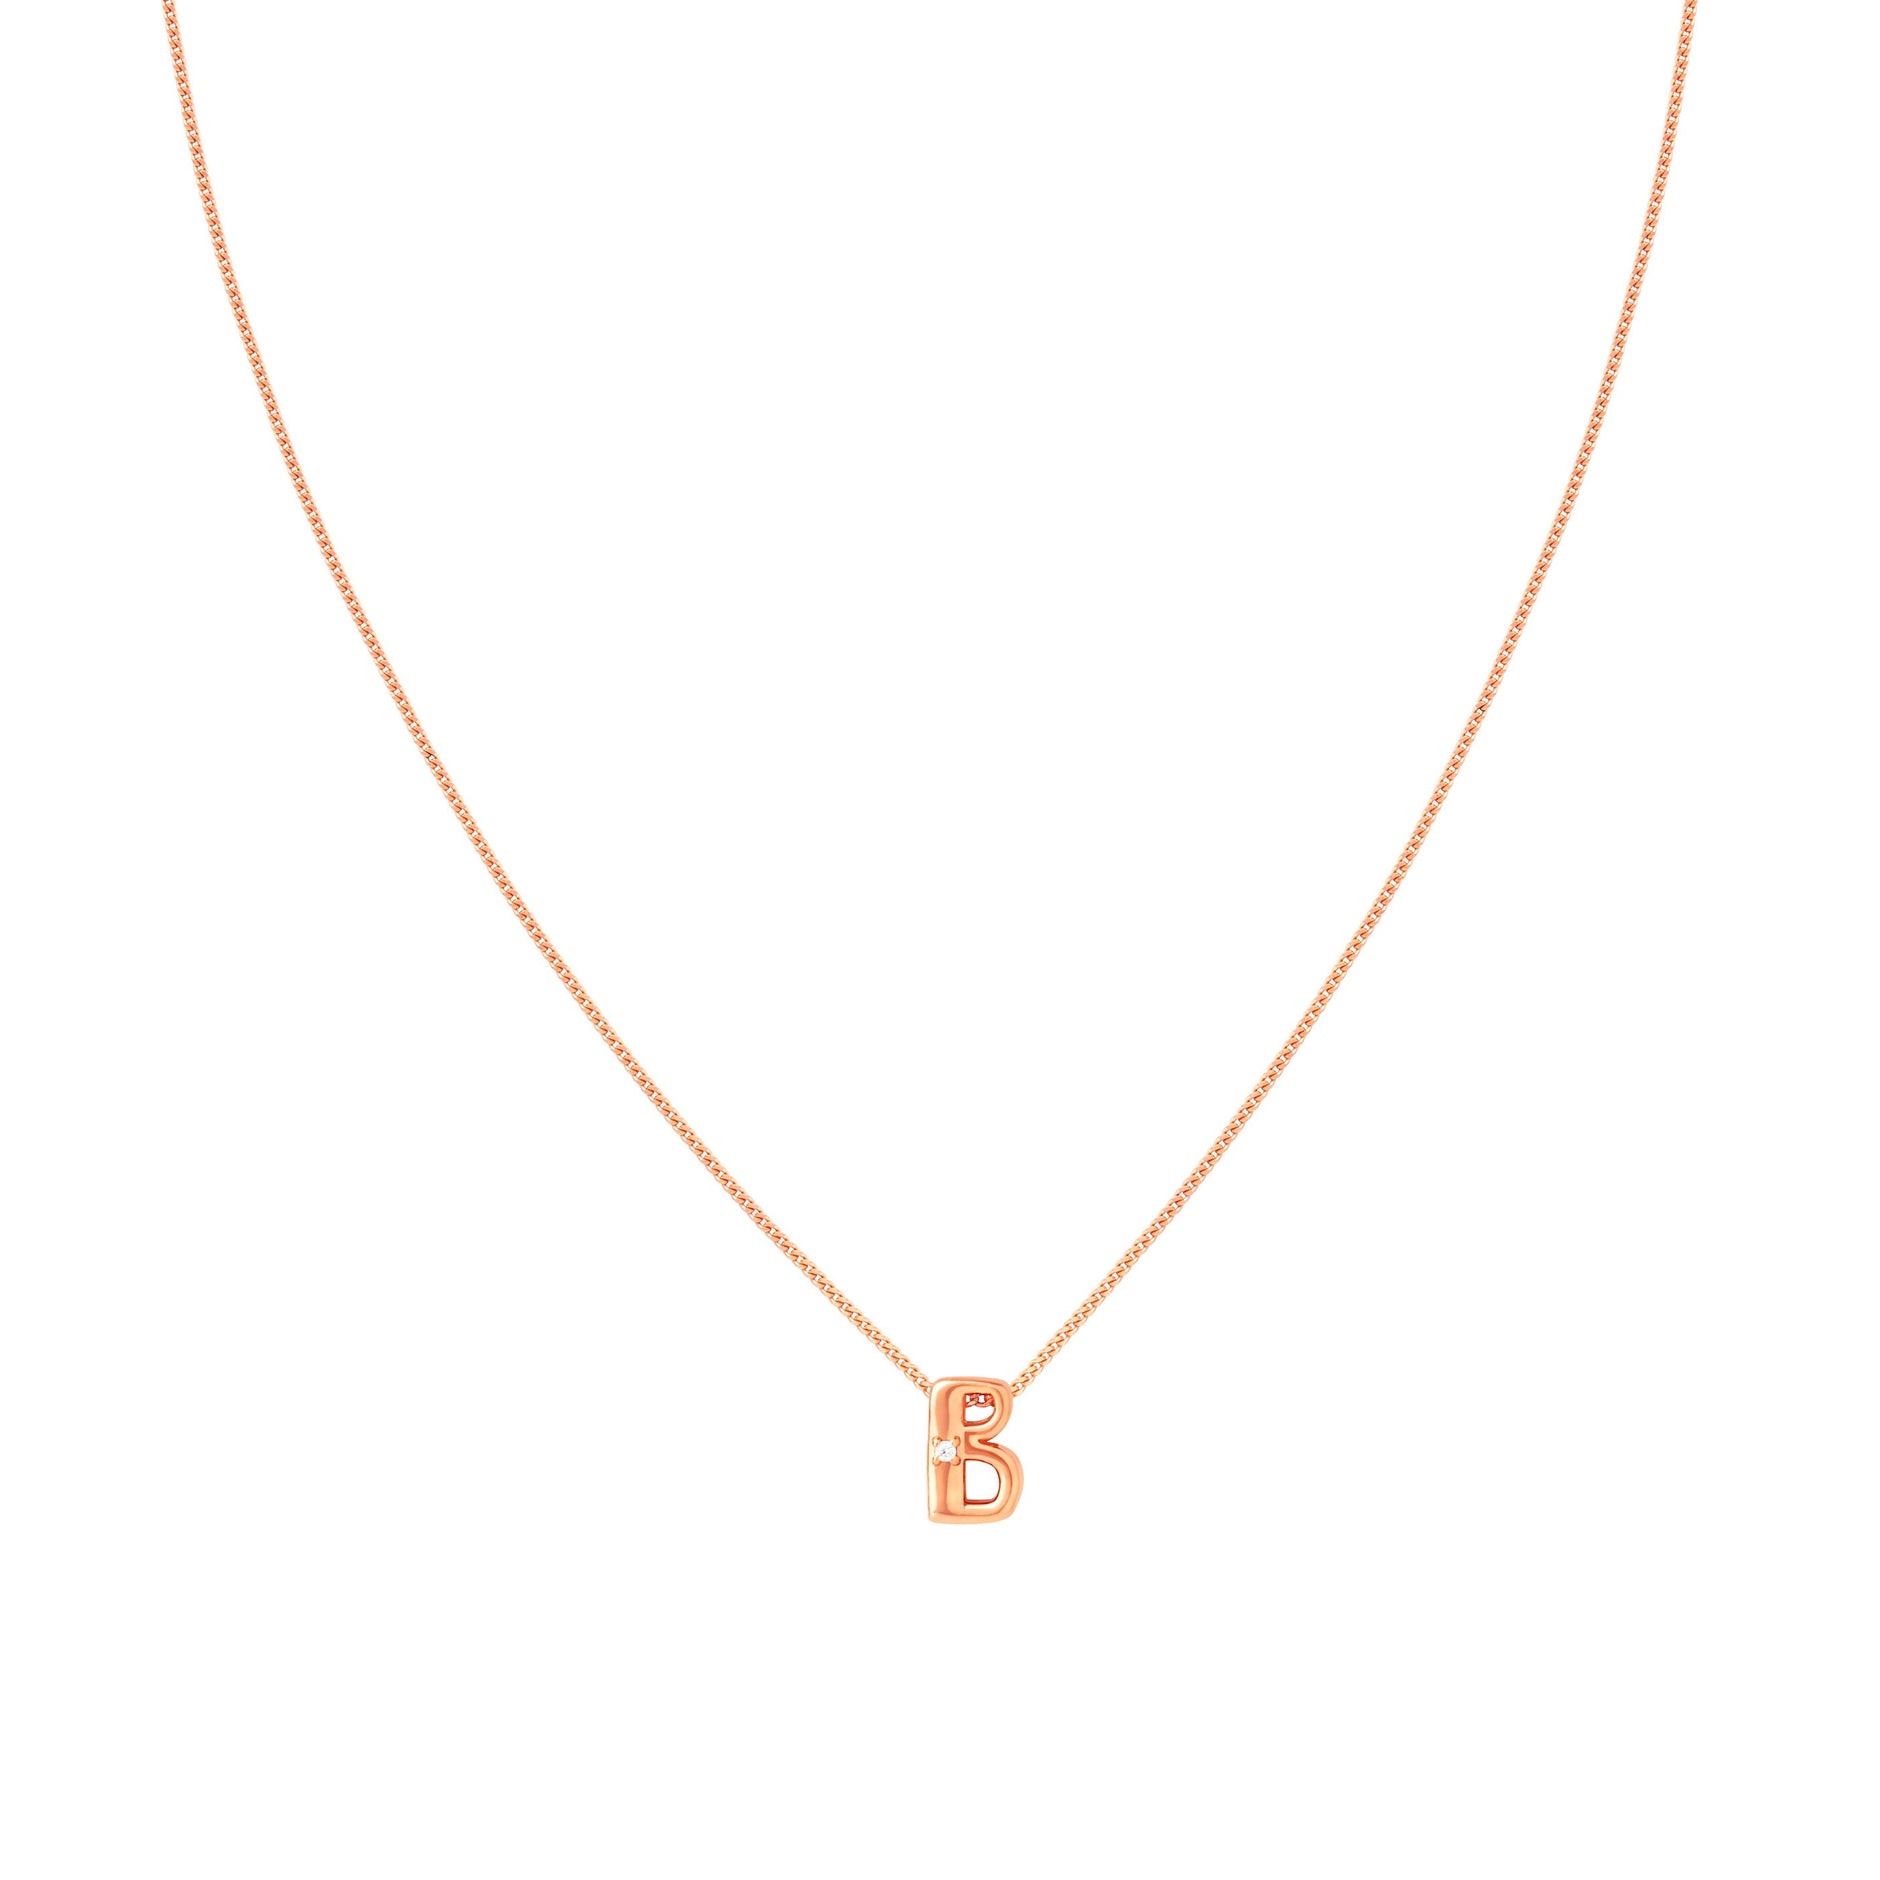 B Initial Pendant Necklace in Rose Gold